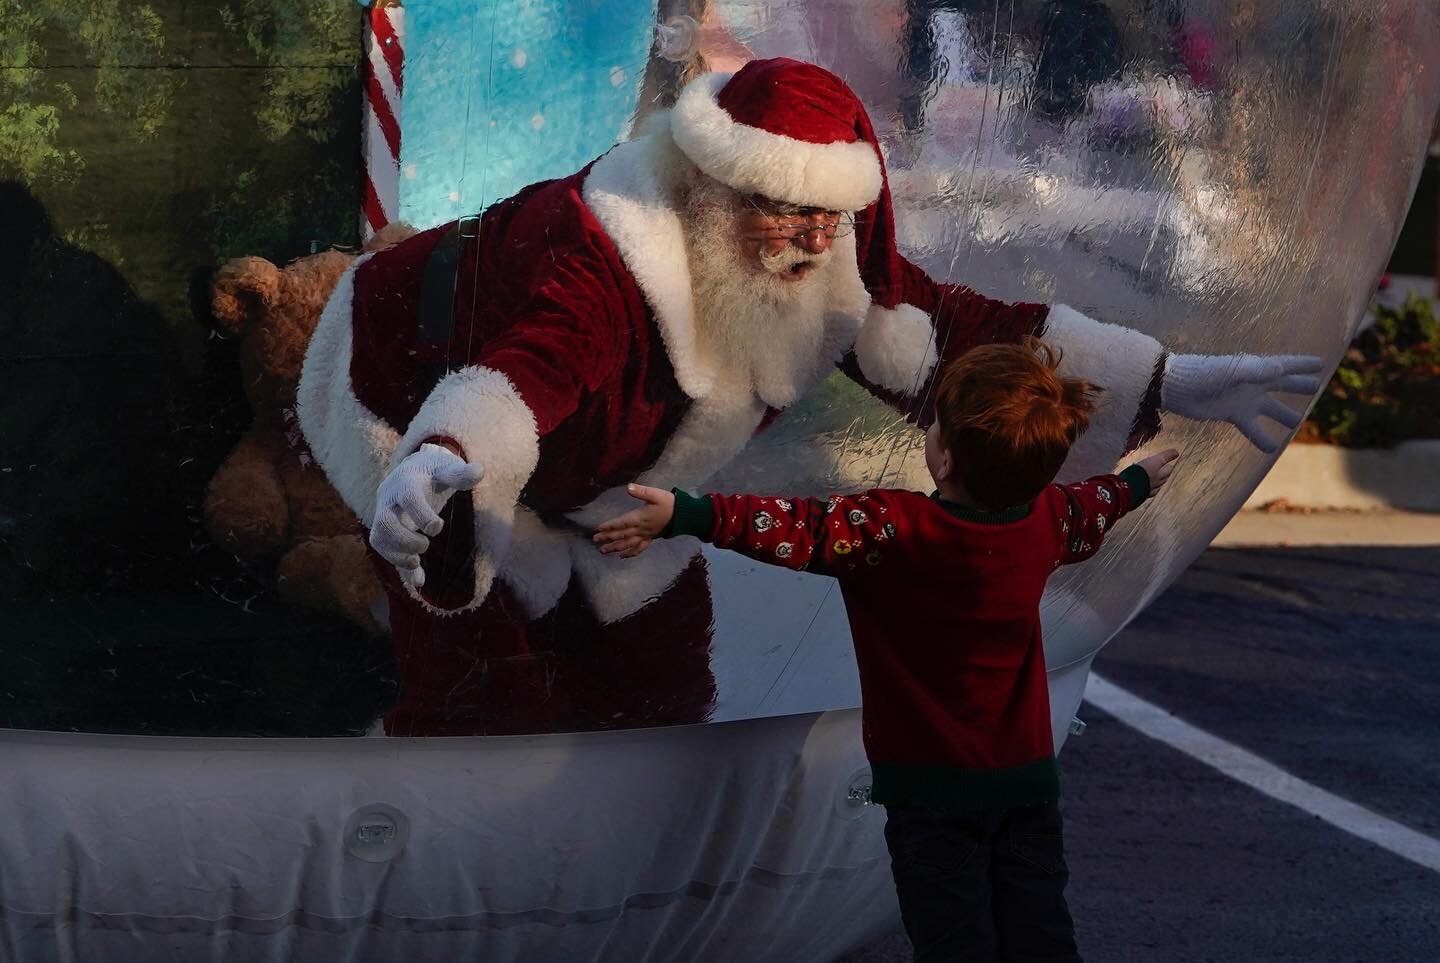  A boy hugs Santa Claus through a plastic bubble to protect against COVID-19 at an event in Oklahoma City, Oklahoma. Nick Oxford/Bloomberg 